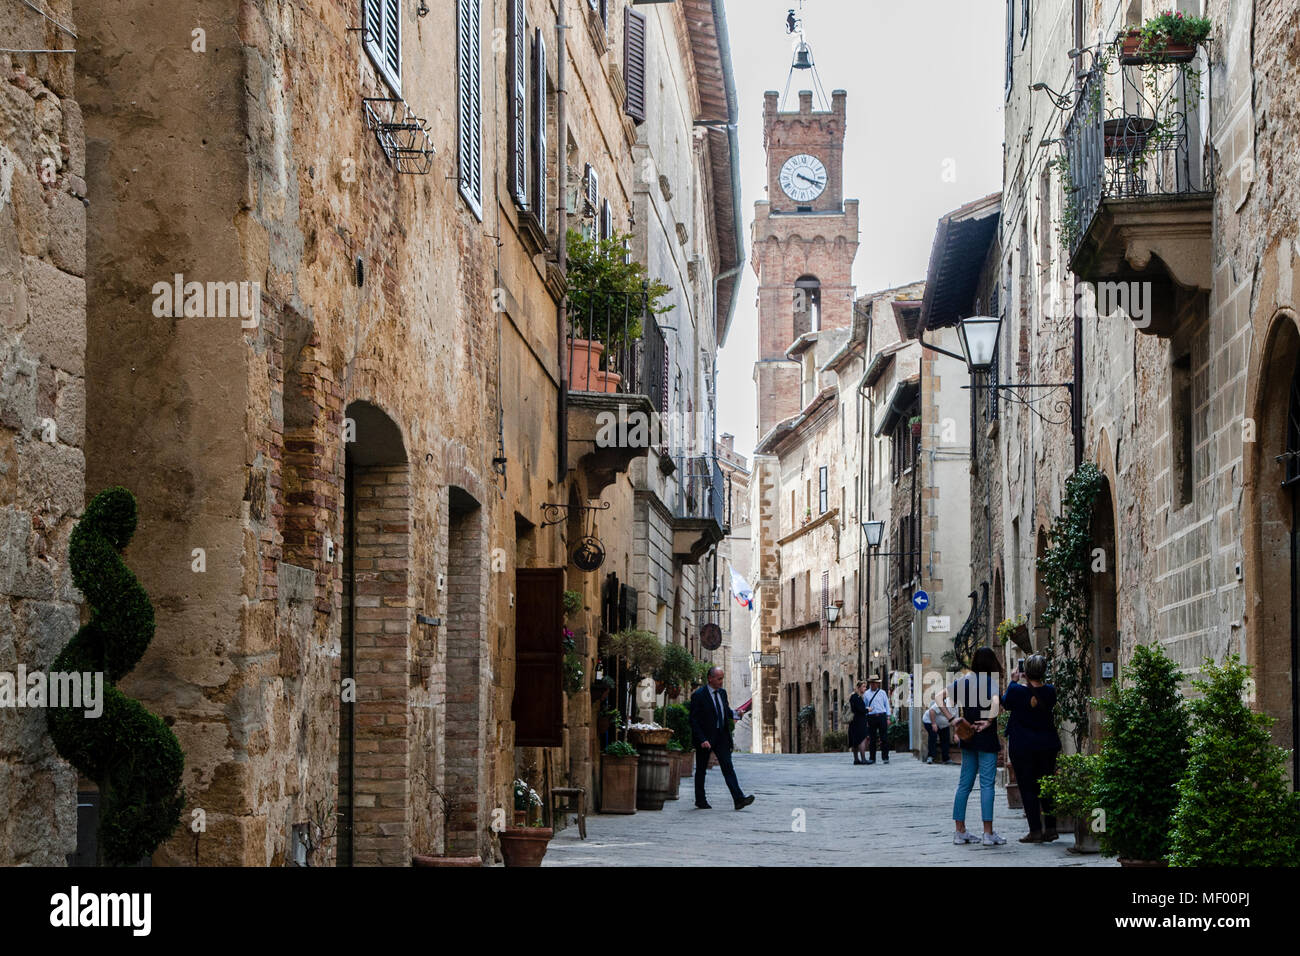 Pienza can be reached from the Hotel Adler Thermae in just 20 minutes by car. So is suitable as a bike trip or a short trip with an electric car of the hotel Adler Thermae. Old town with the bell tower of the city administration Pienza, Tuscany, Italy Stock Photo